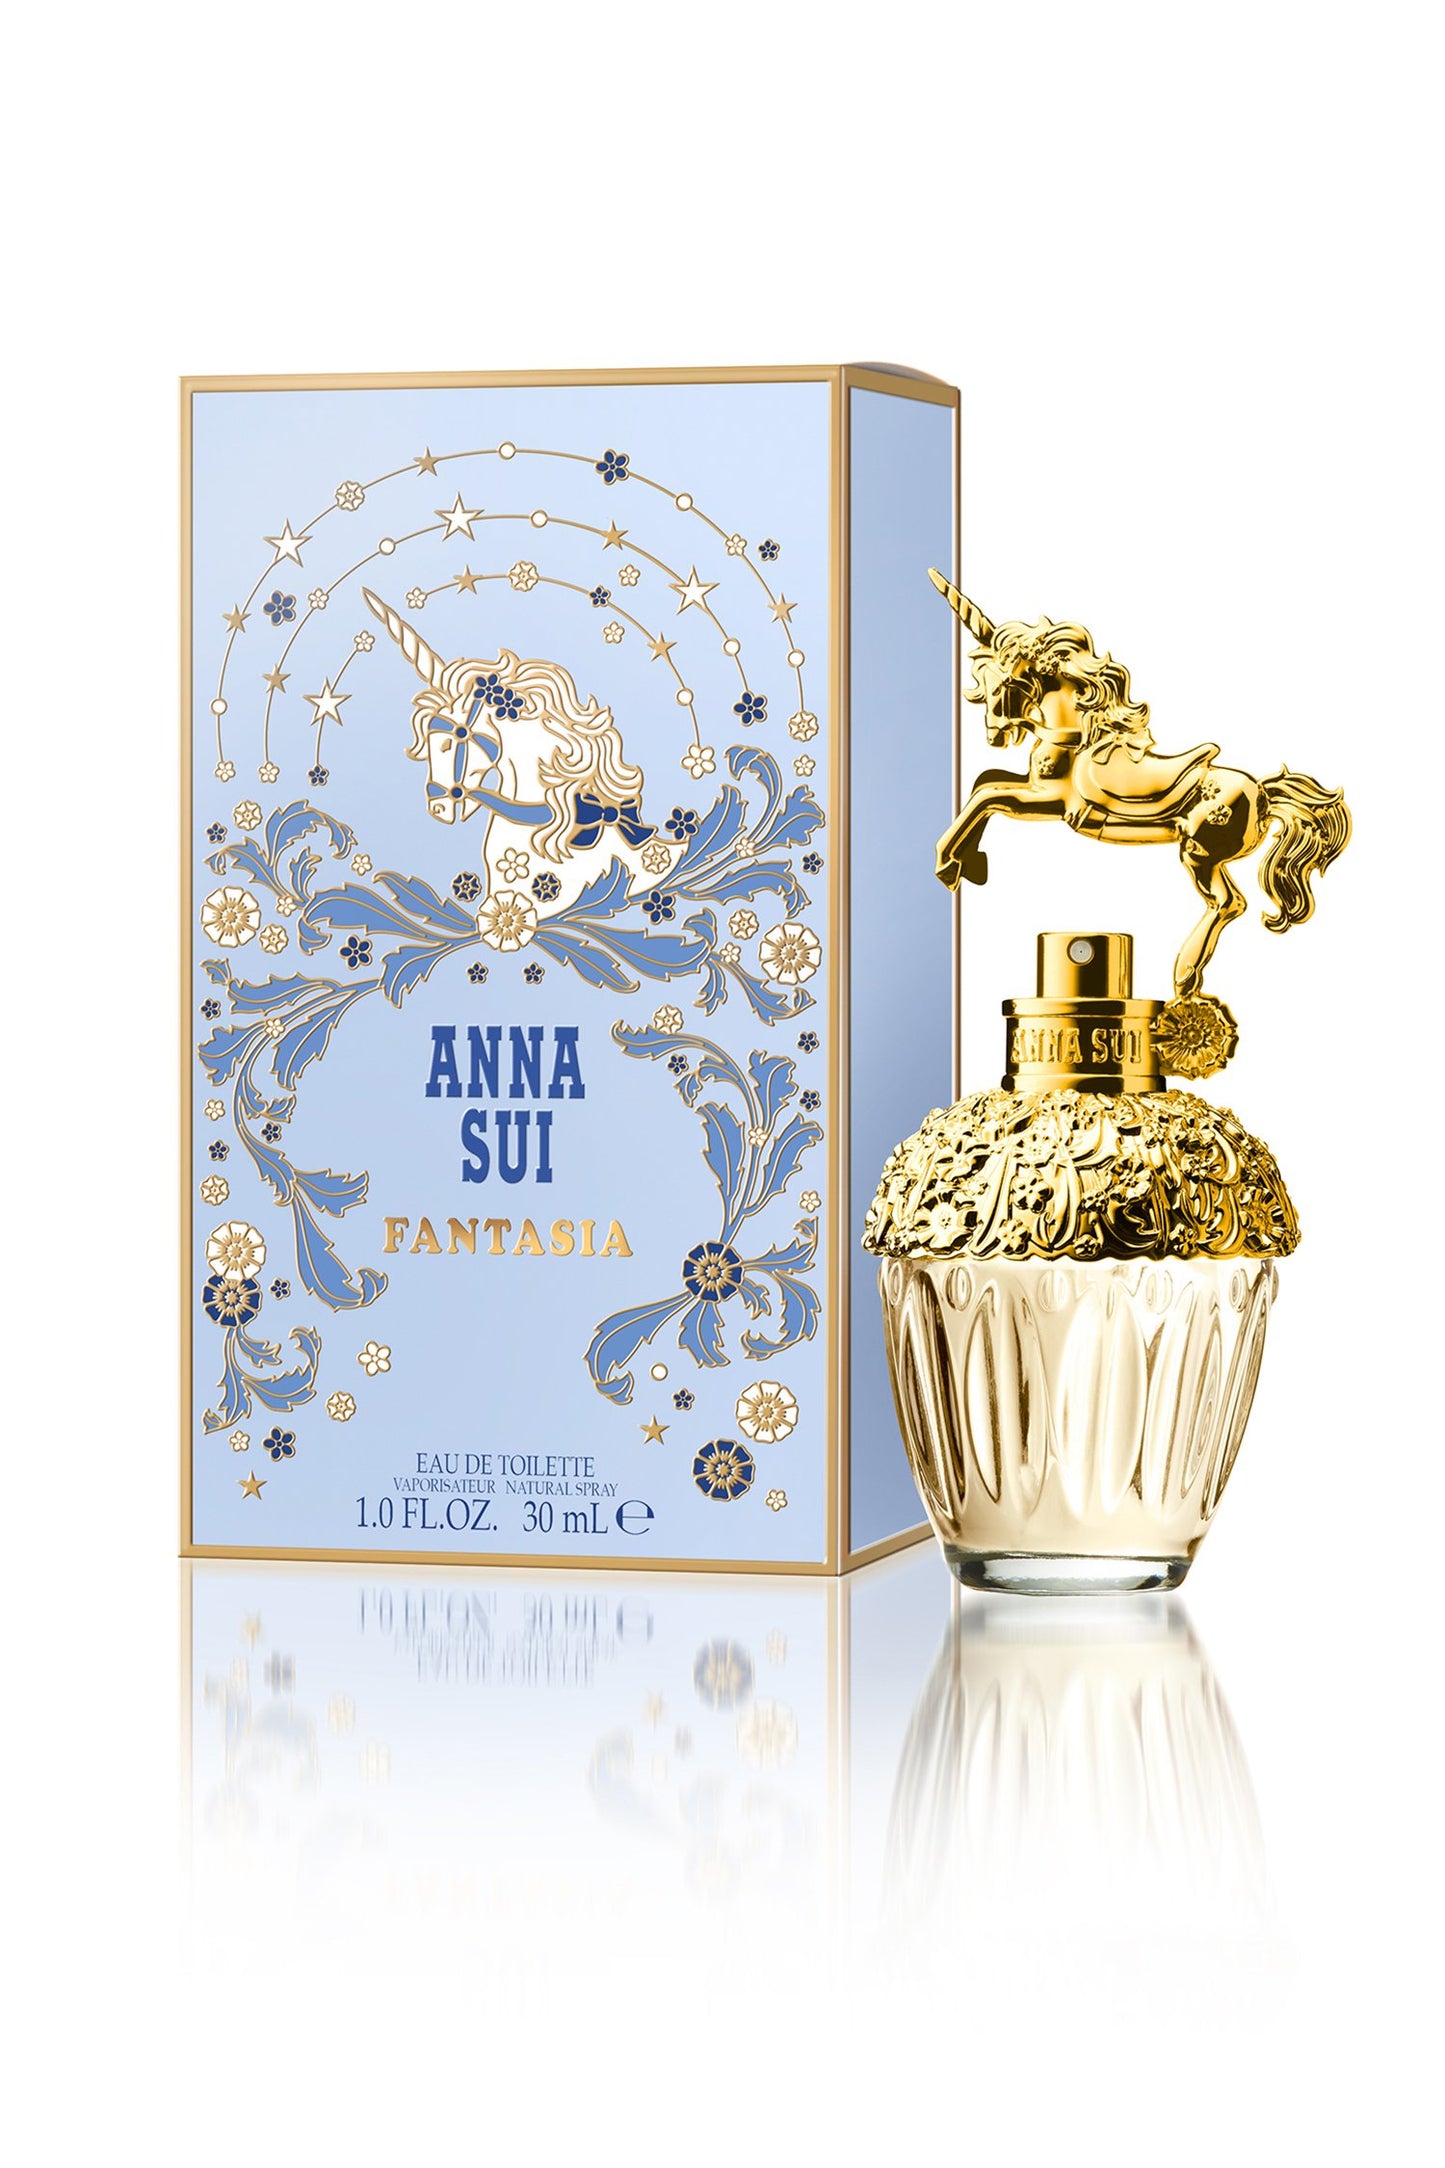 Packaging is light blue, Logo, name and quantity on it and art deco golden and darker blue unicorn